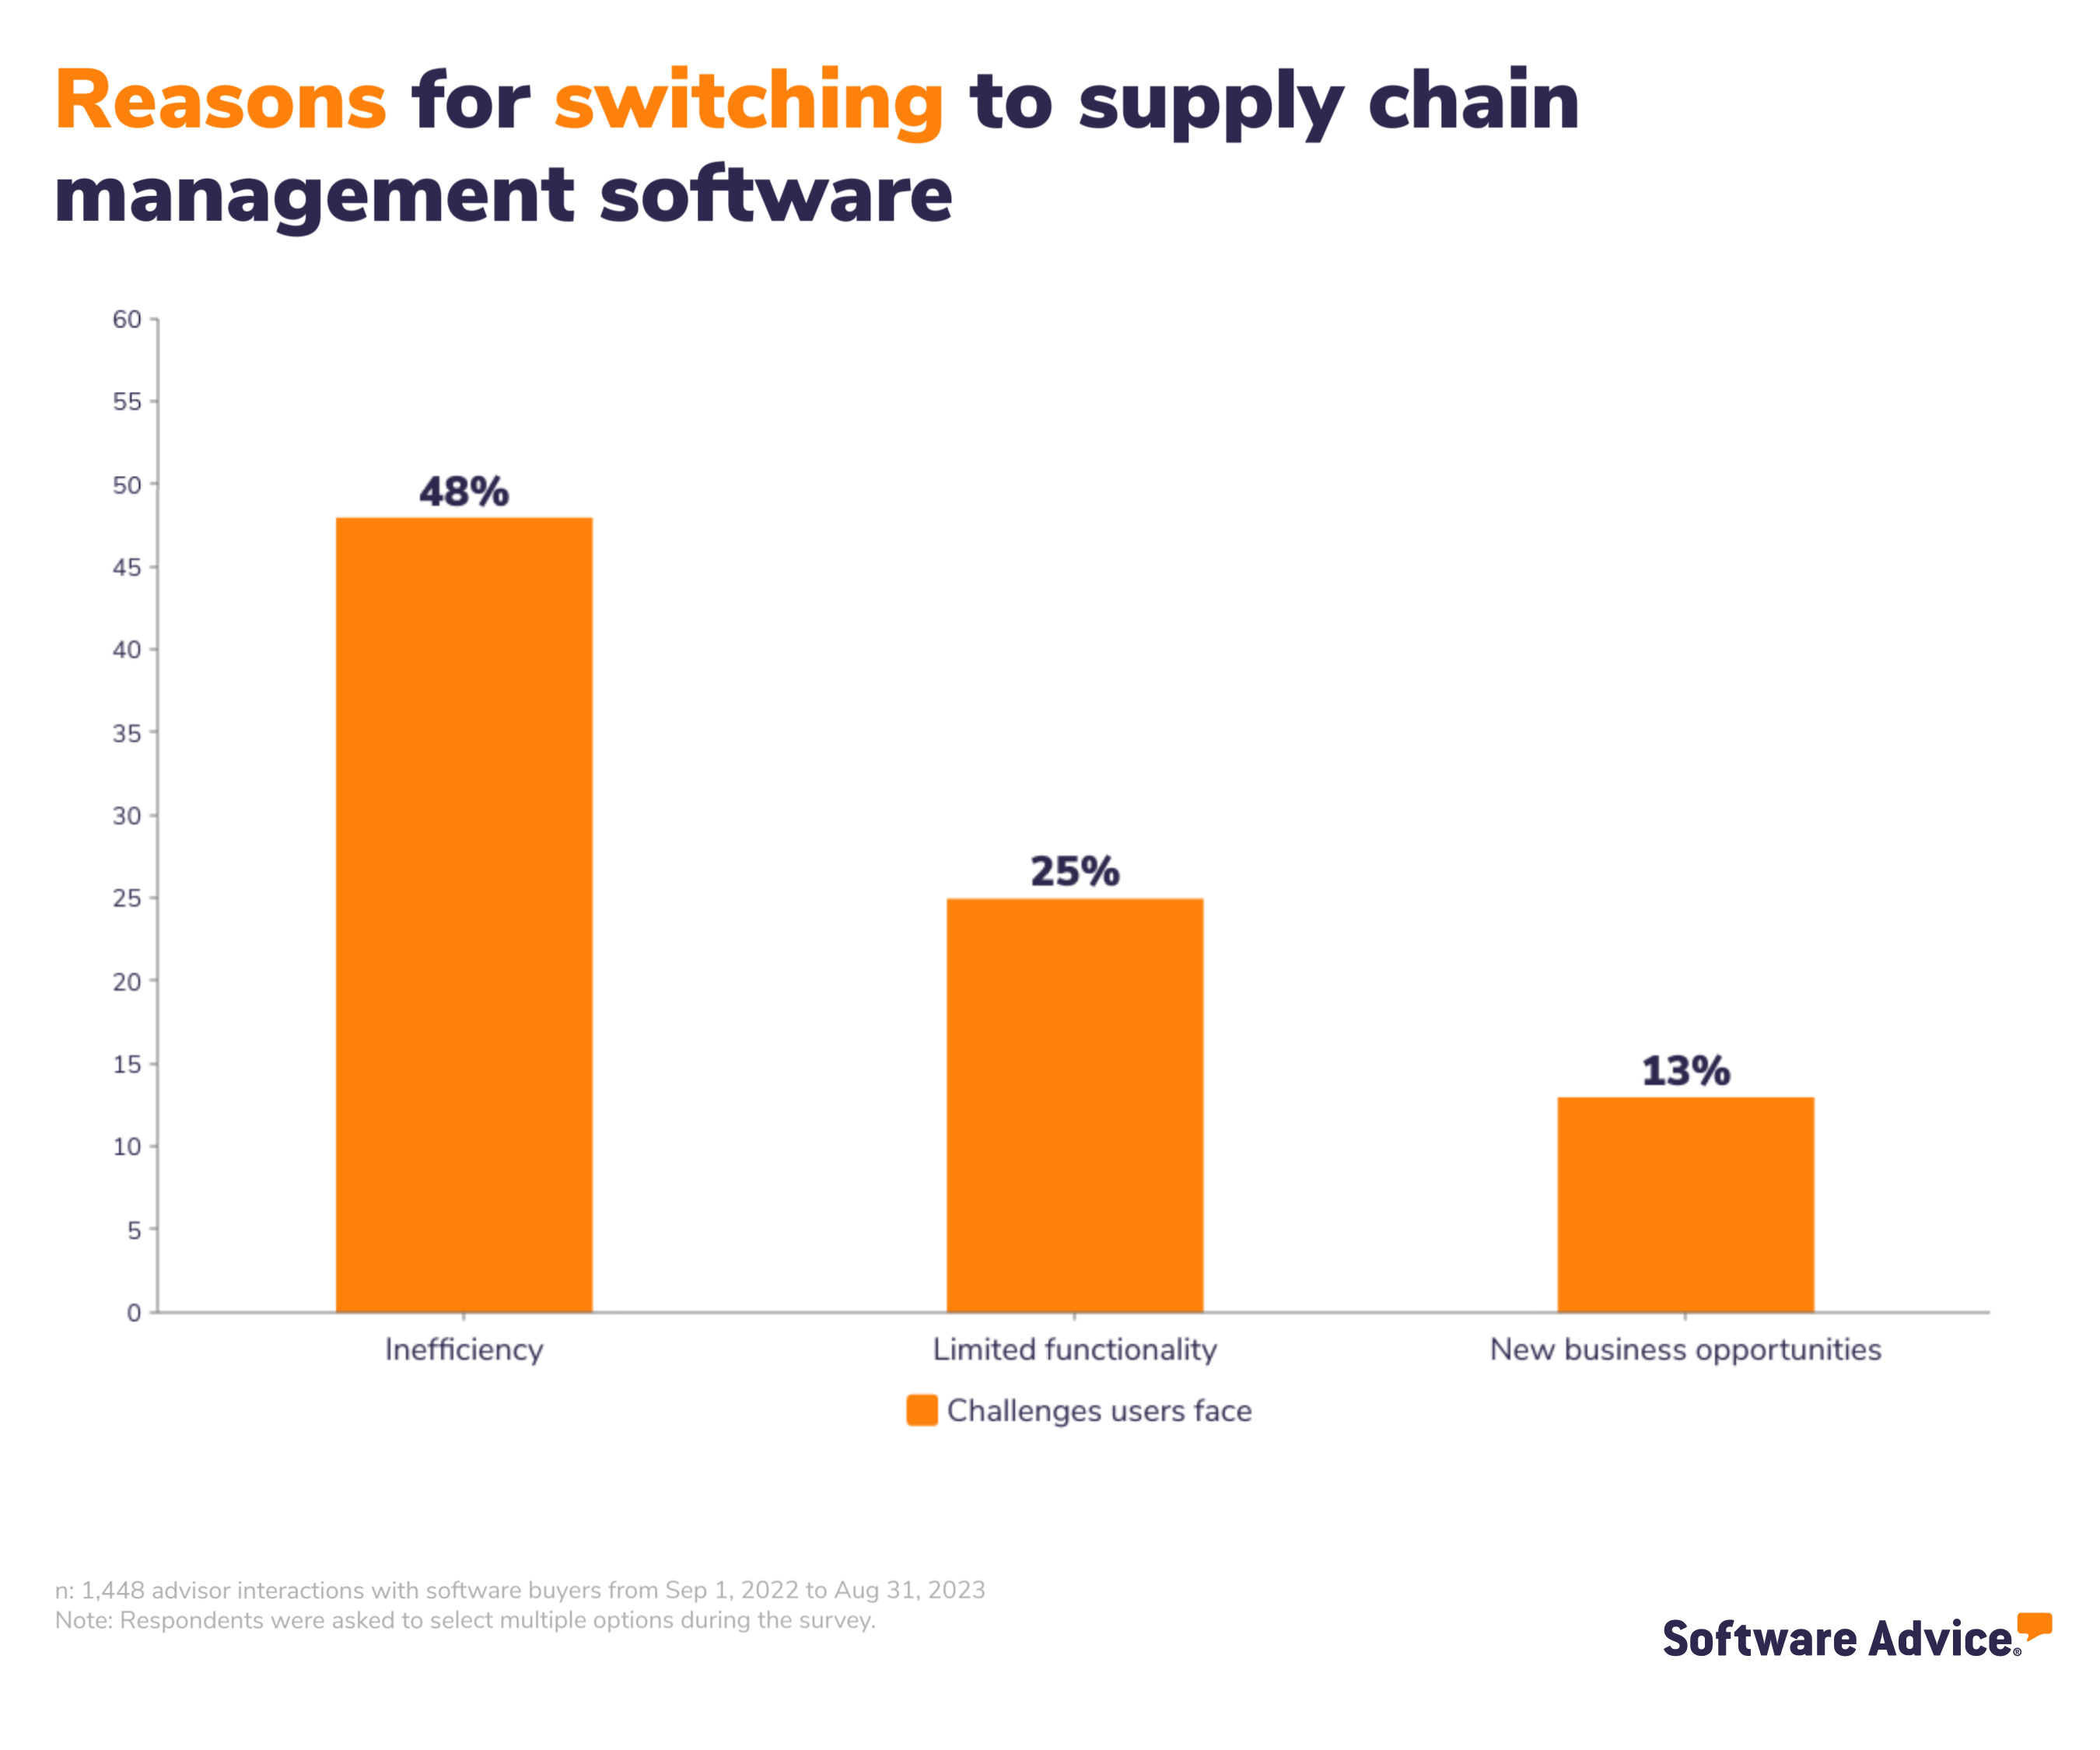 Reasons for switching to SCM software